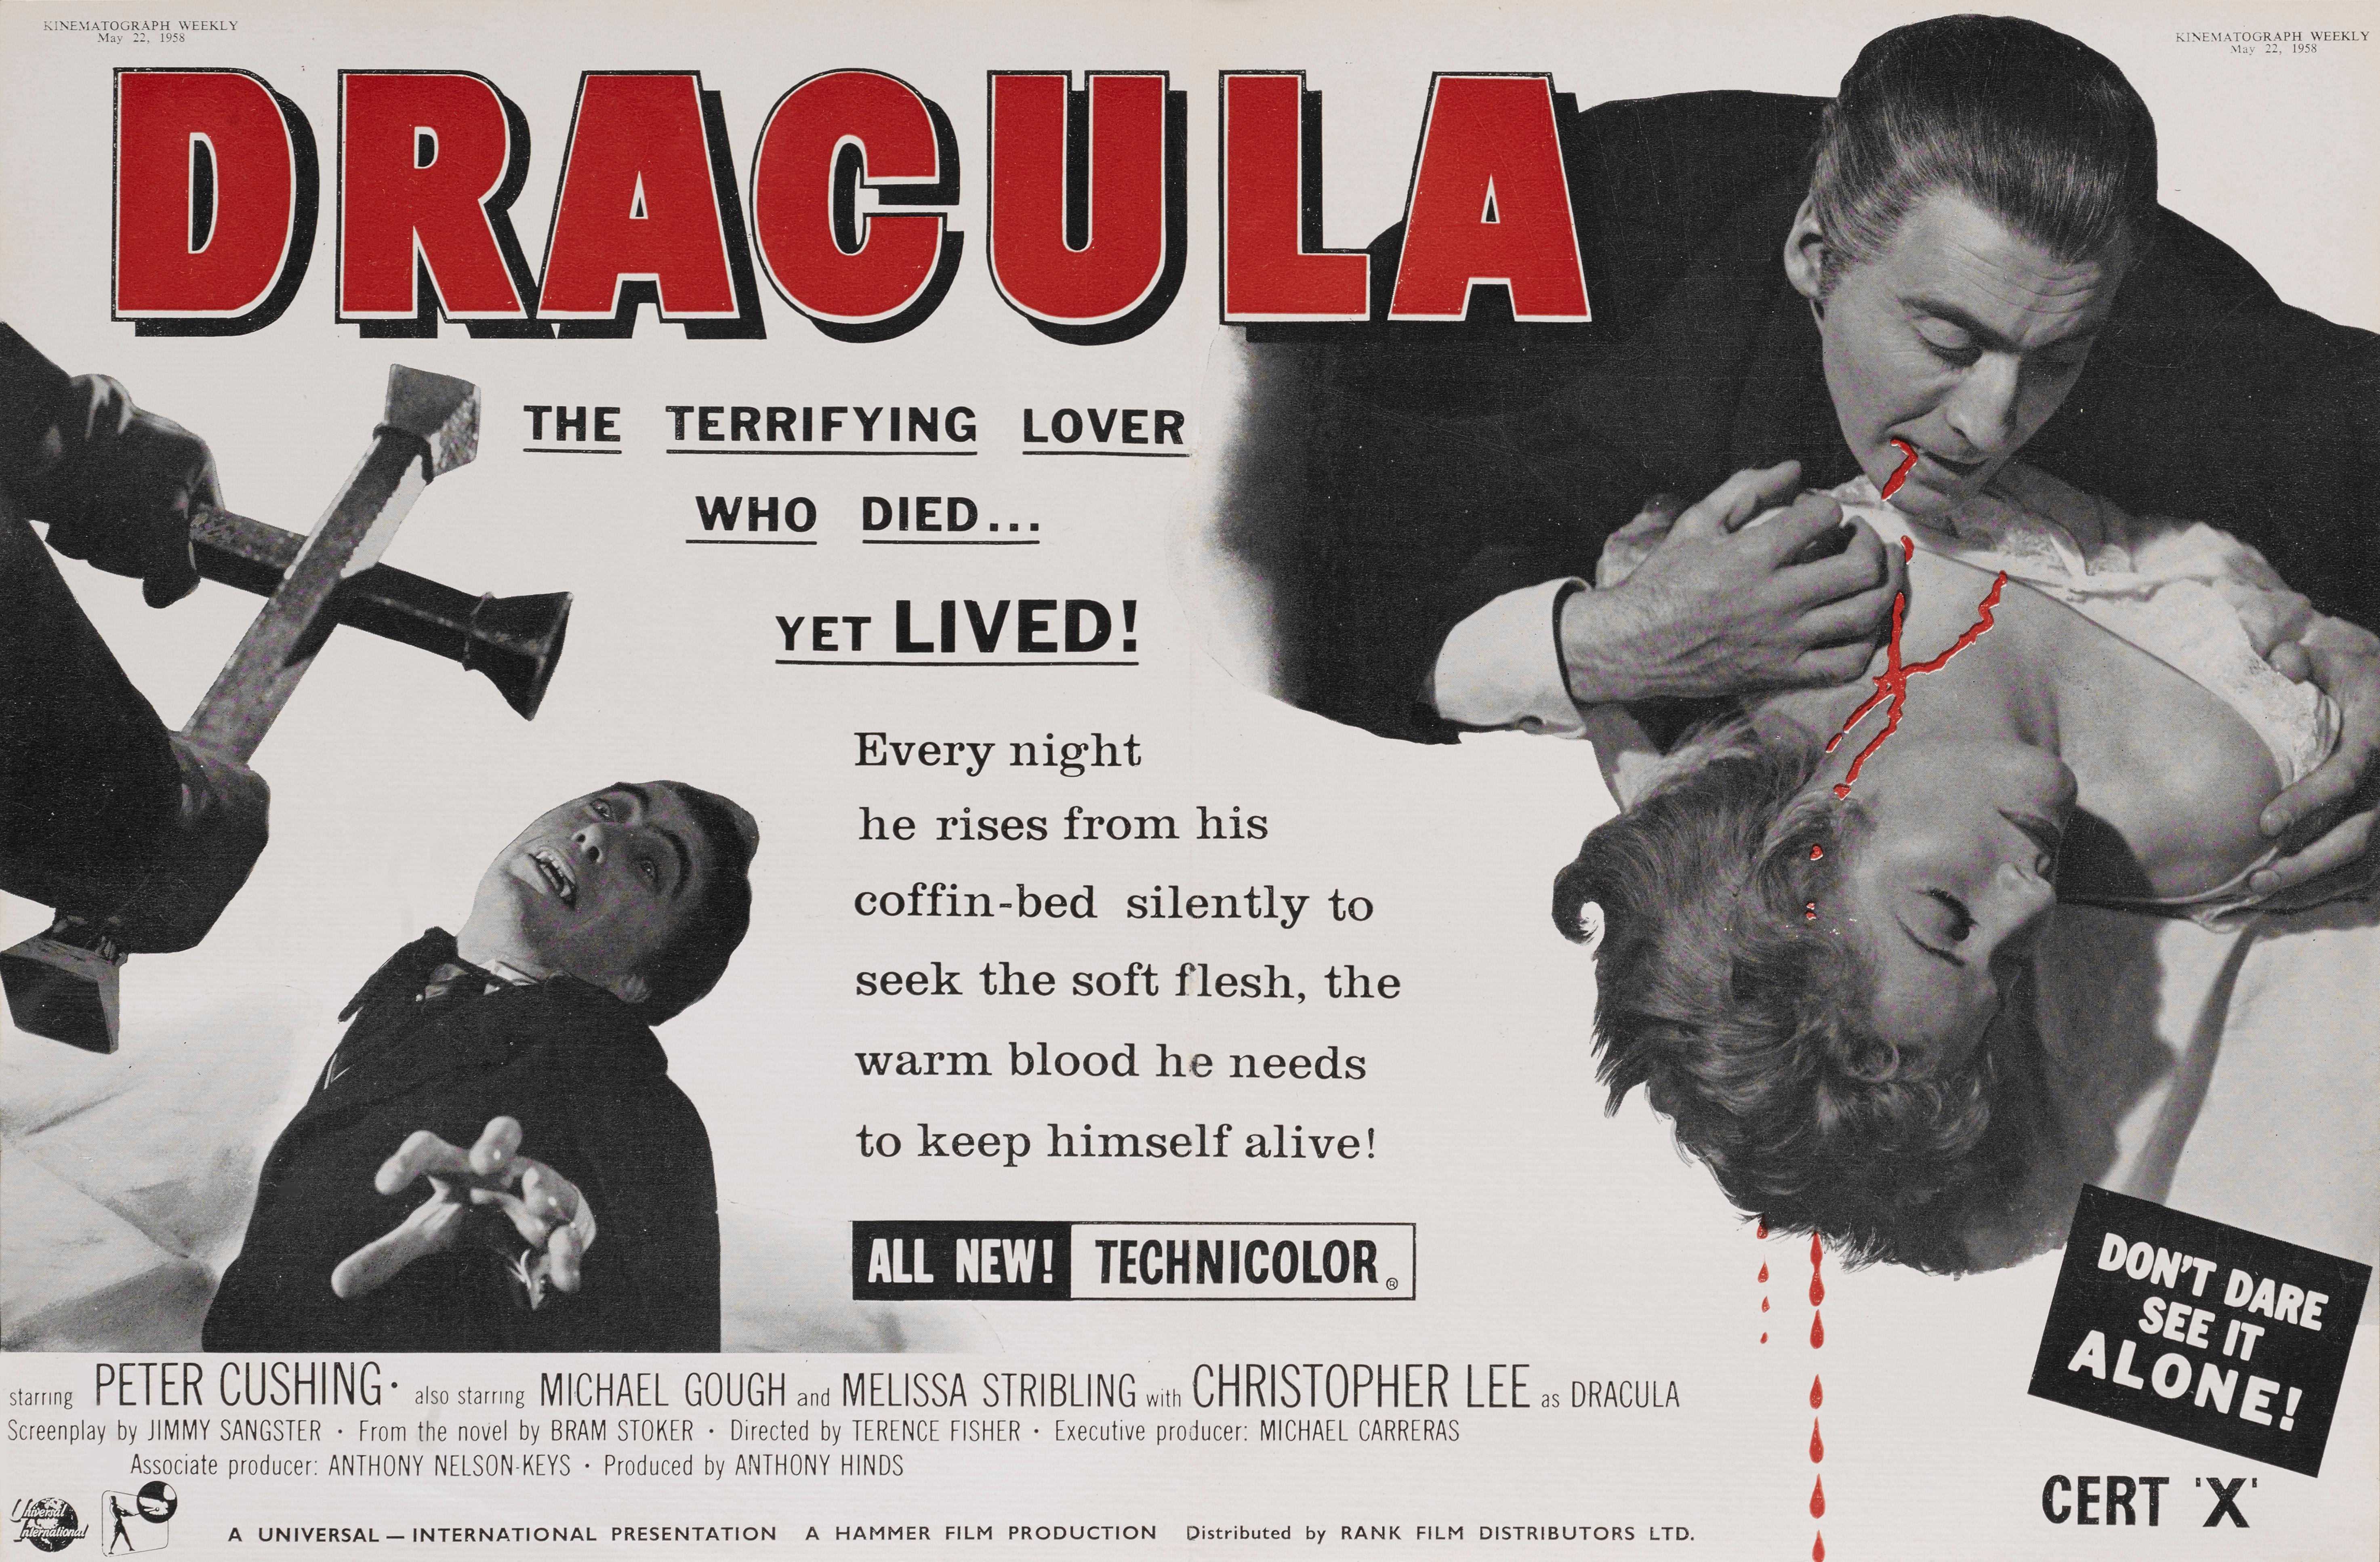 Original British trade advertisement from Kinematograph weekly, May 22nd 1958.
Hammer horror film are some of the most collectible titles and Dracula being the first film is highly sought-after.
The film was directed by Terence Fisher and starred